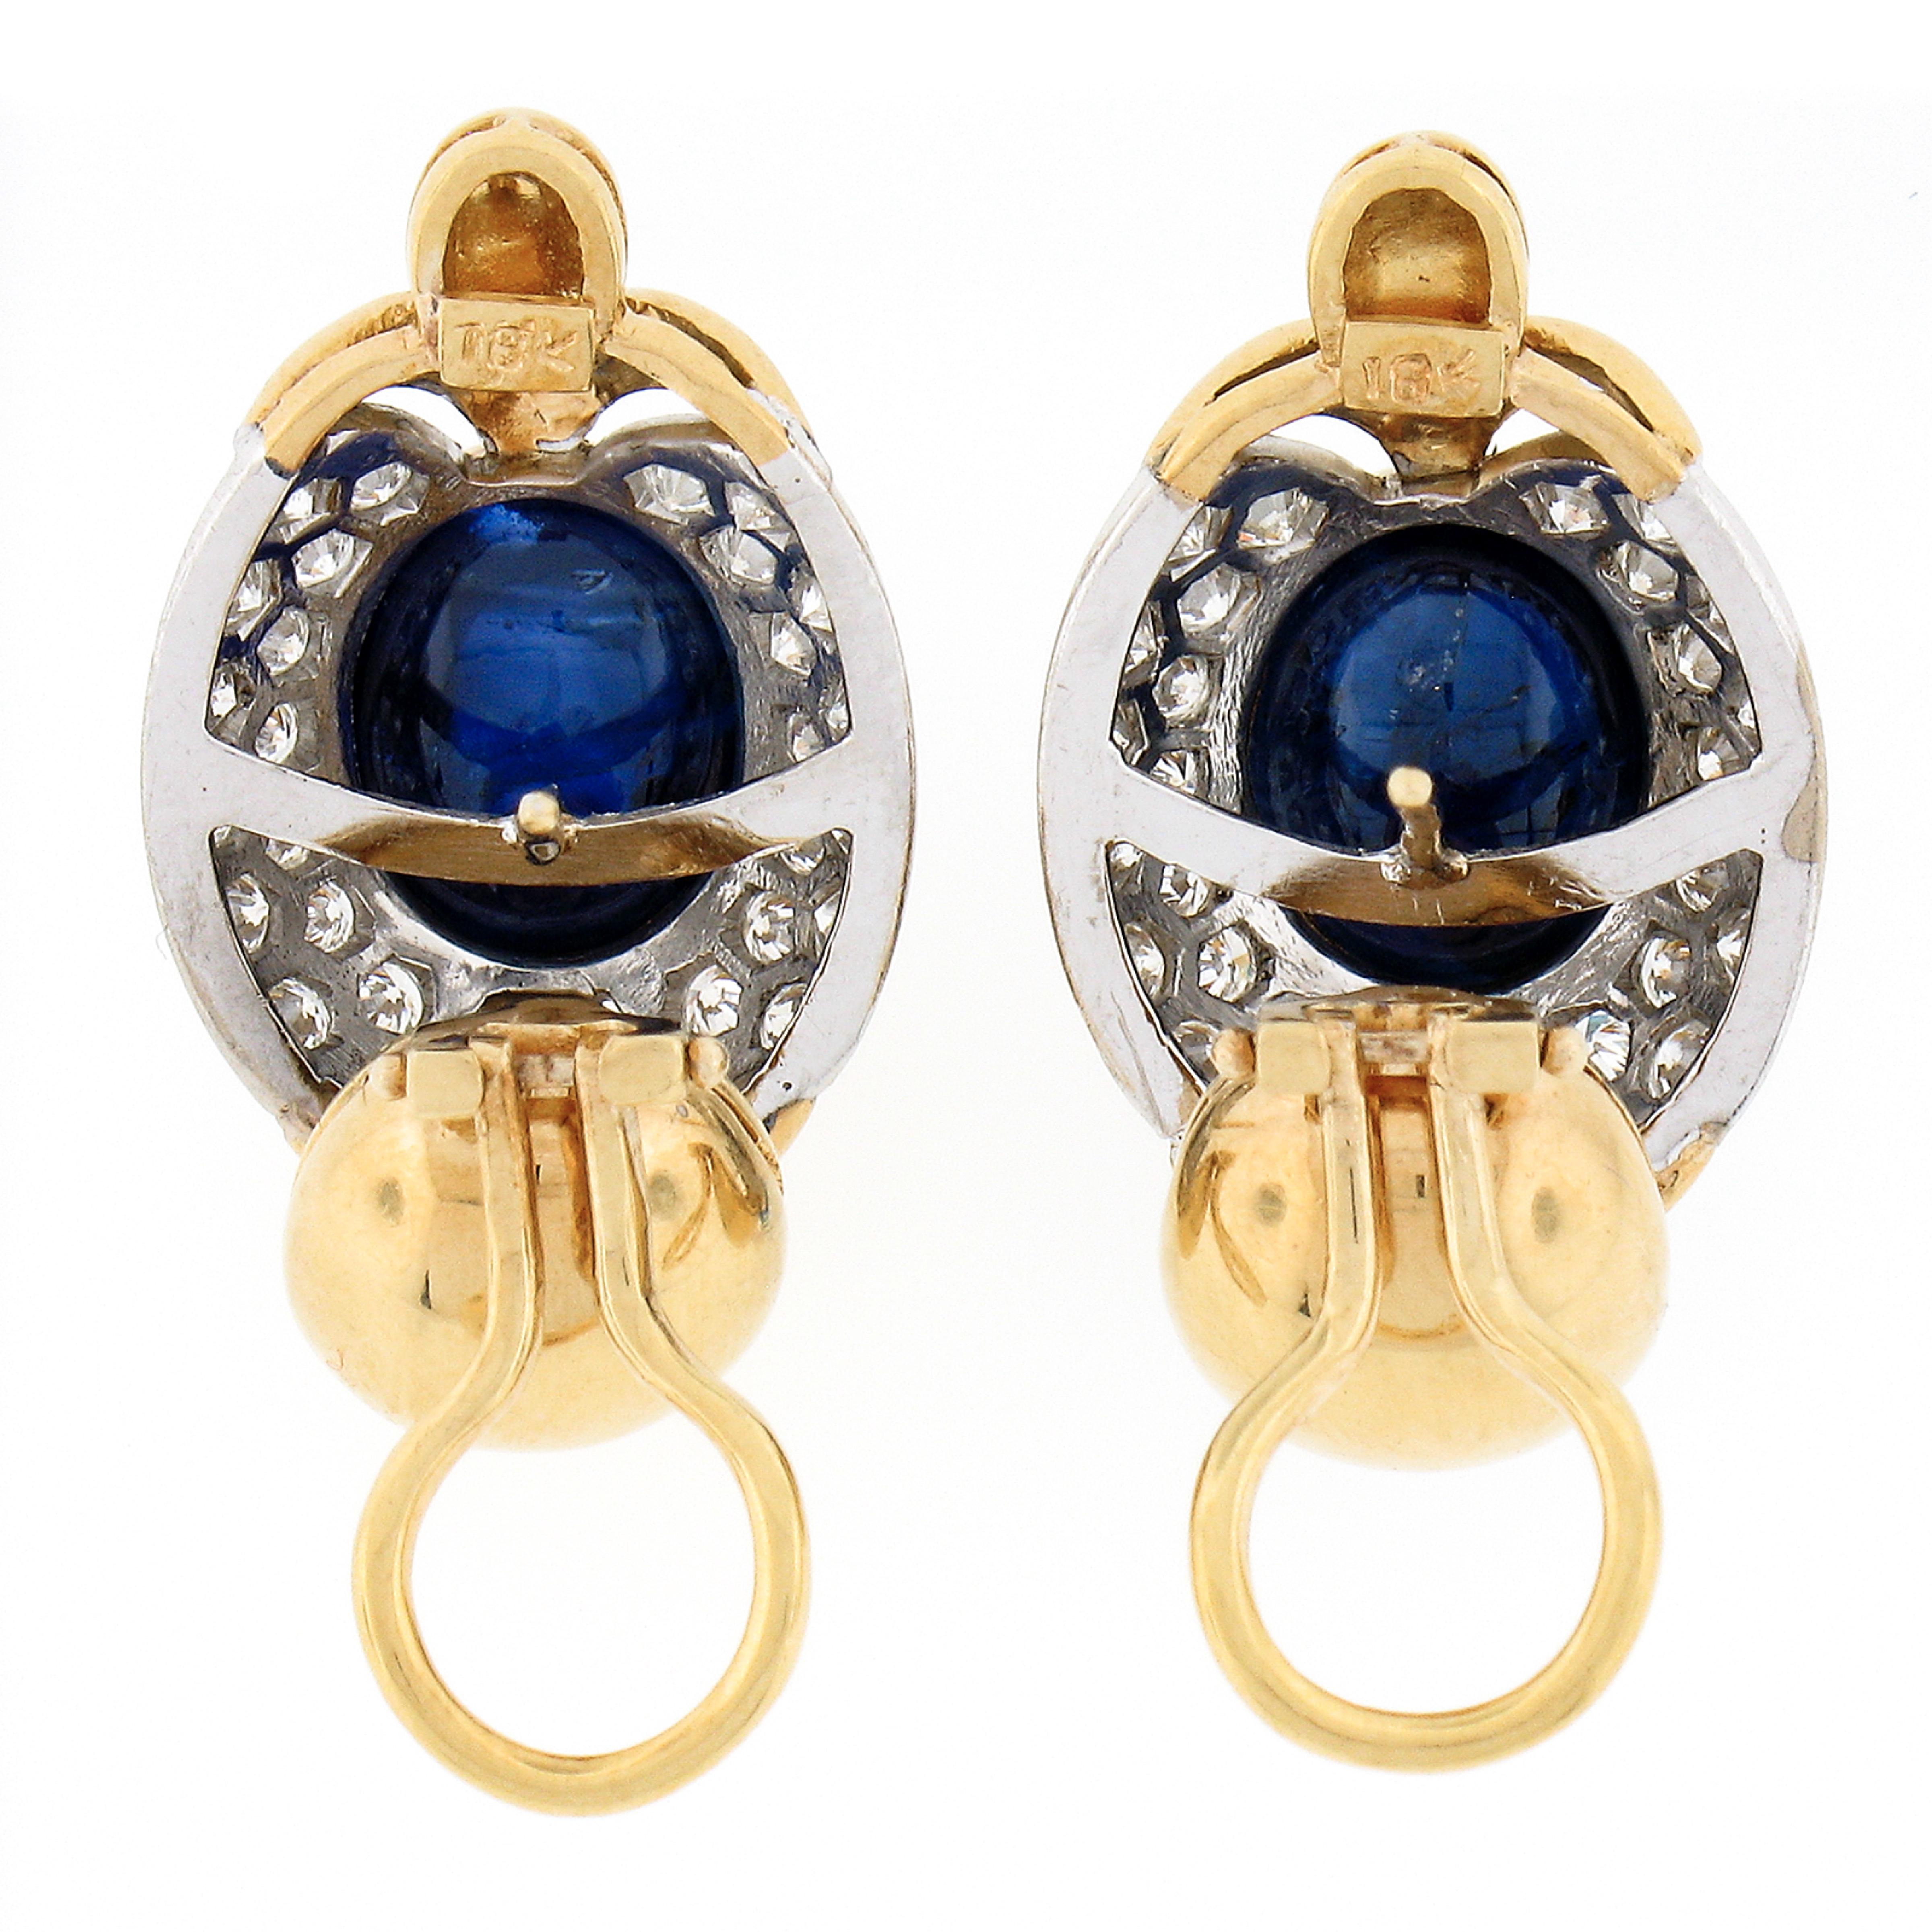 Large 18k Gold 18+ct GIA Oval Cabochon Sapphire Diamond Statement Cuff Earrings For Sale 1